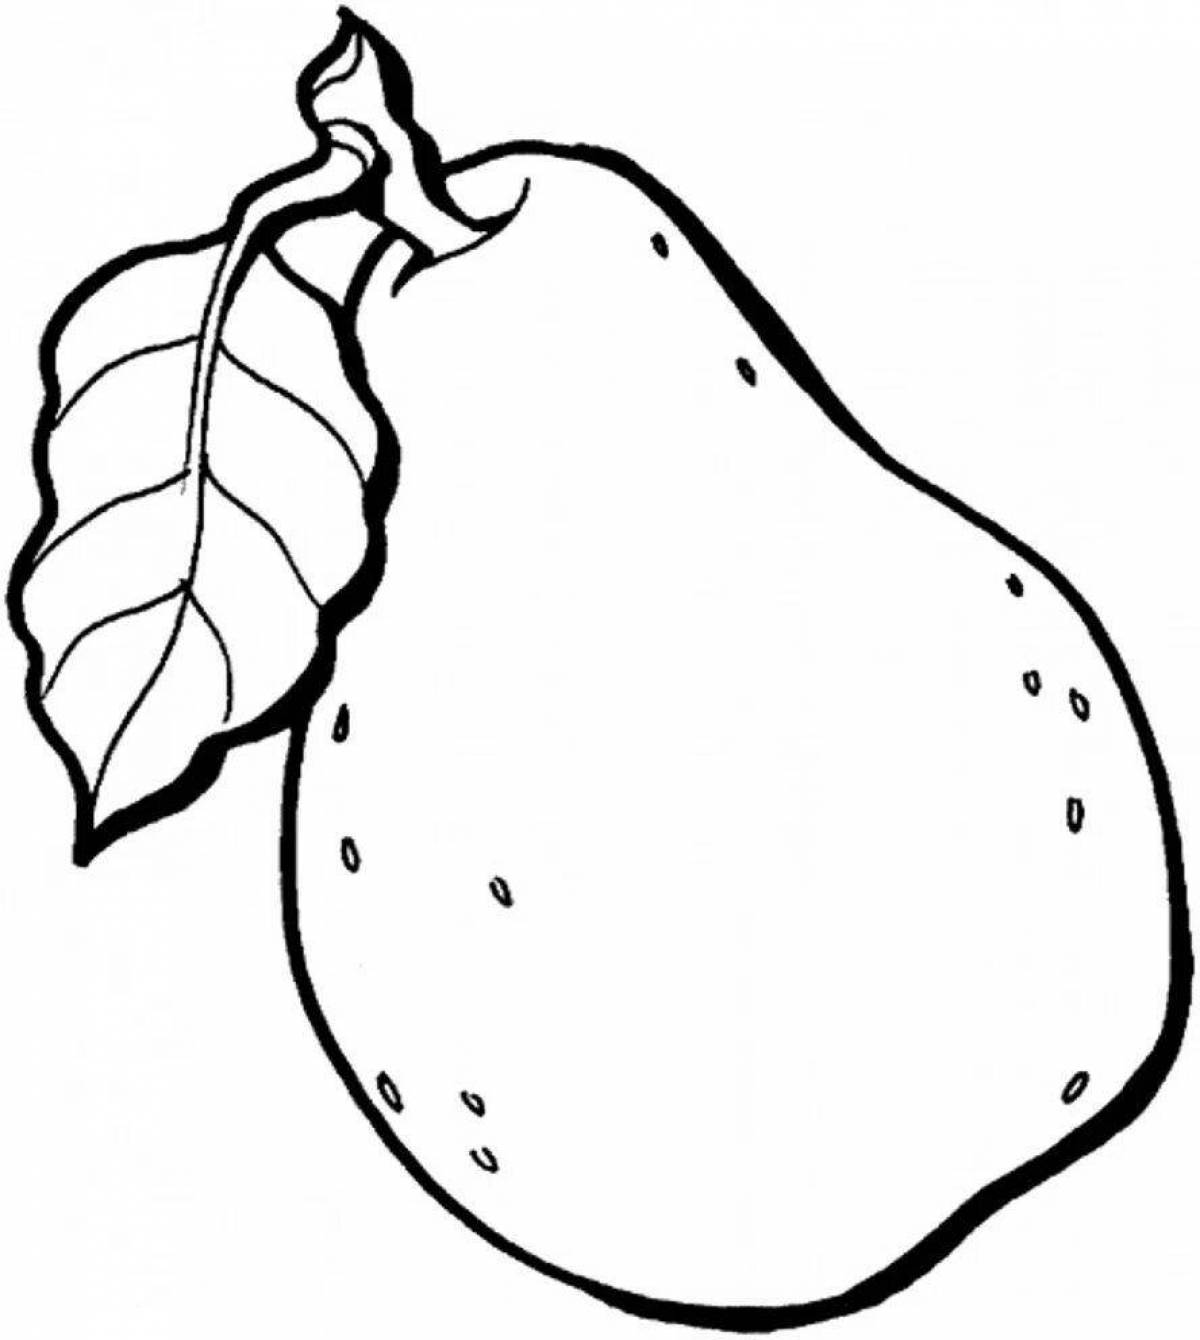 Live pear coloring for children 3-4 years old